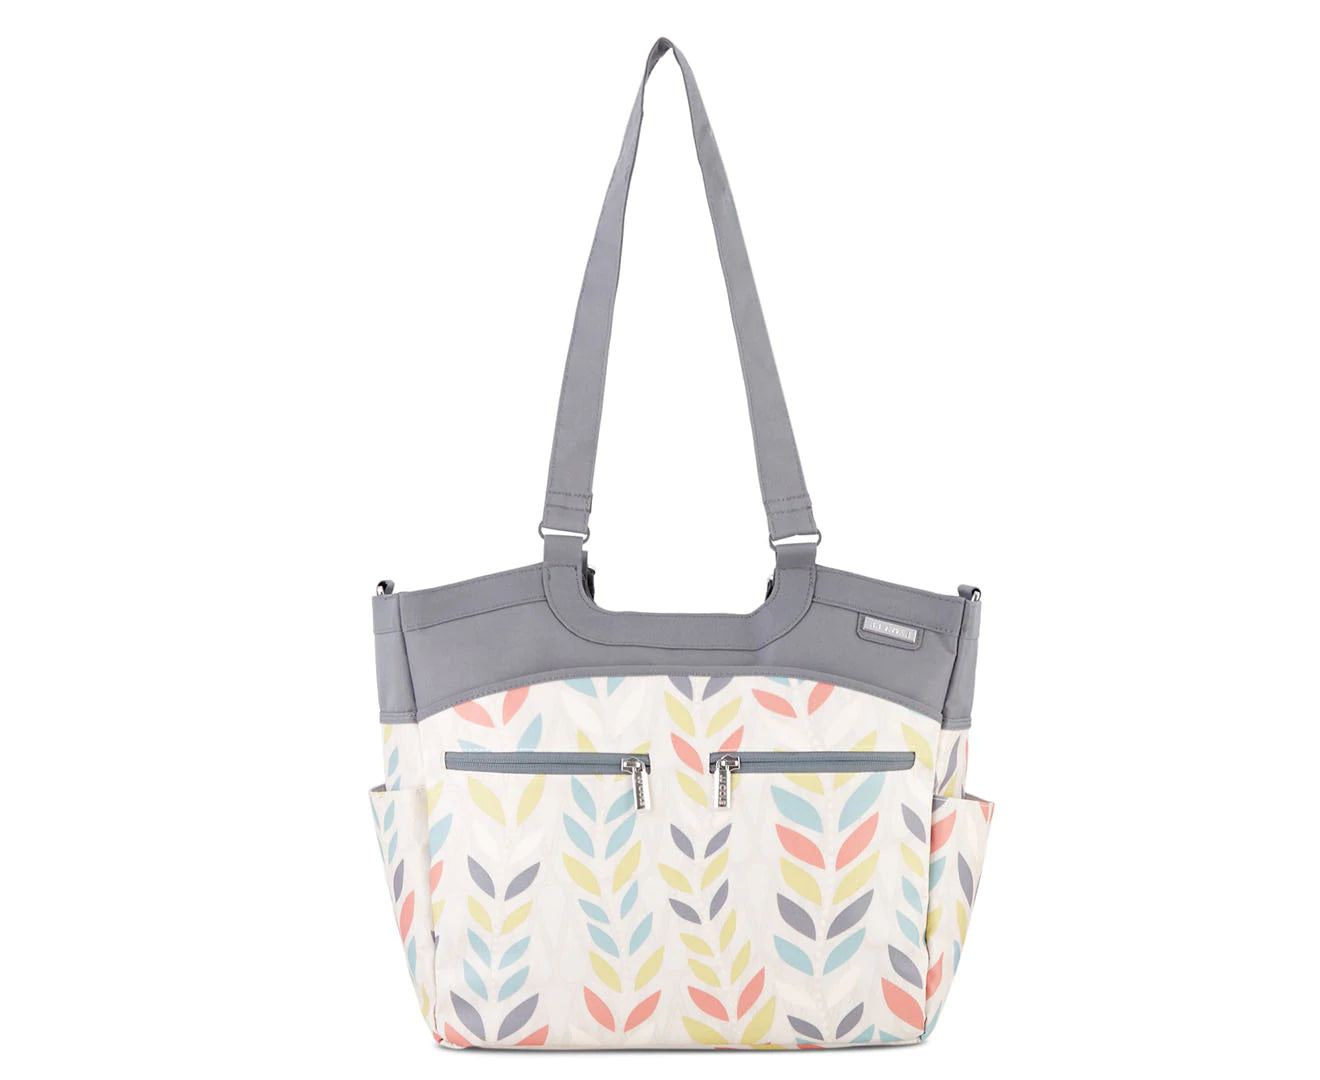 JJ Cole Camber Baby Maternity Nappy Bag - Citrus Breeze